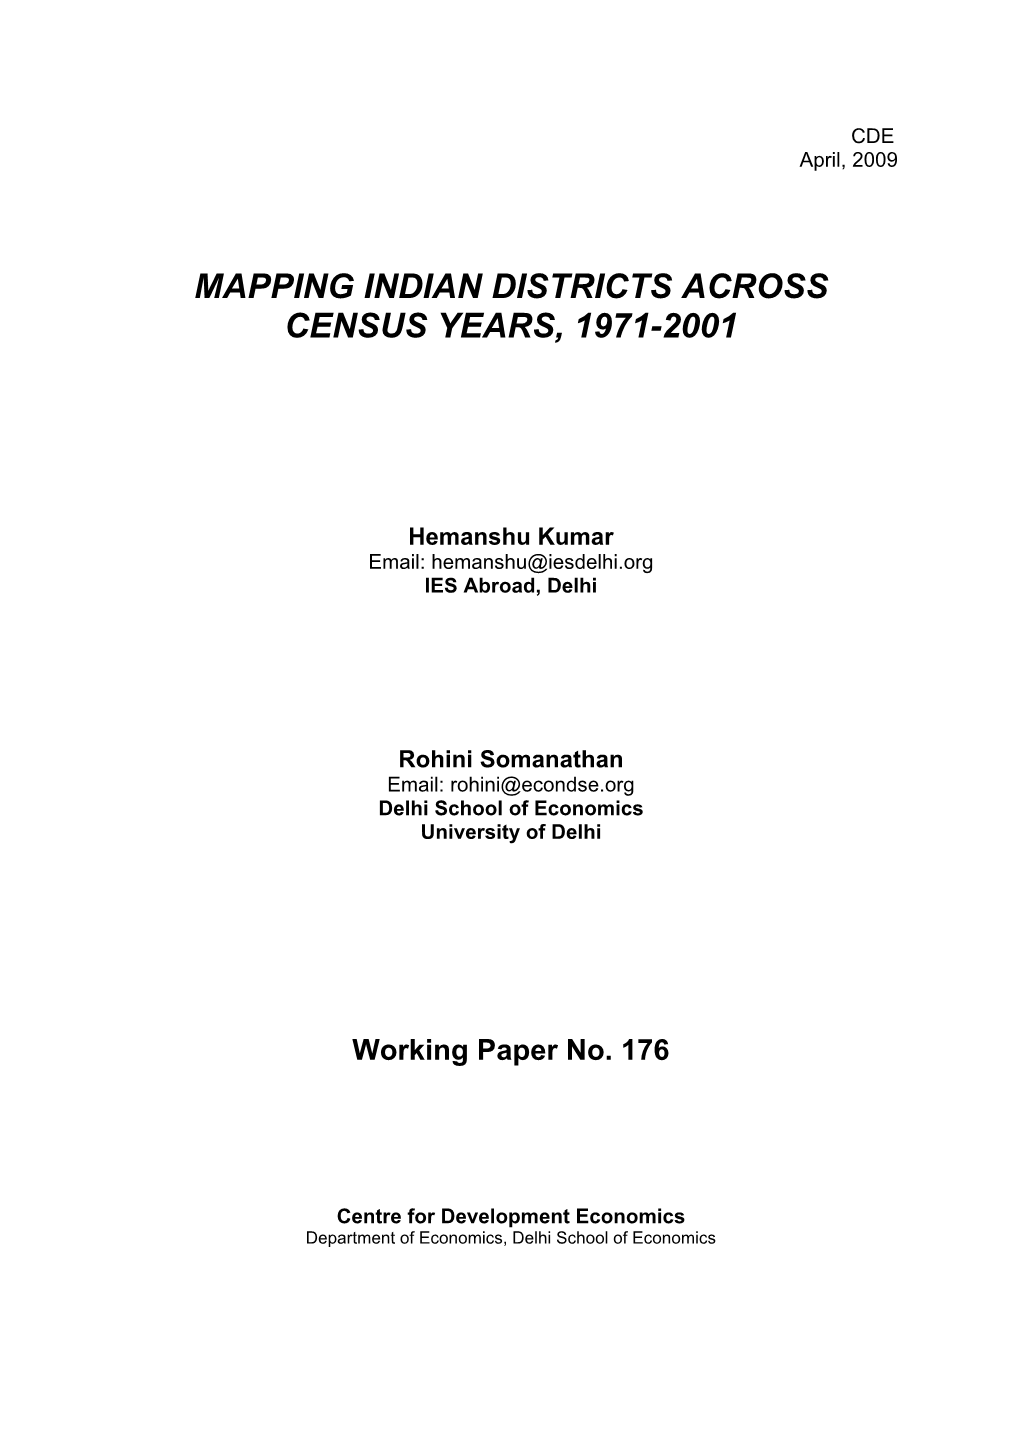 Mapping Indian Districts Across Census Years, 1971-2001